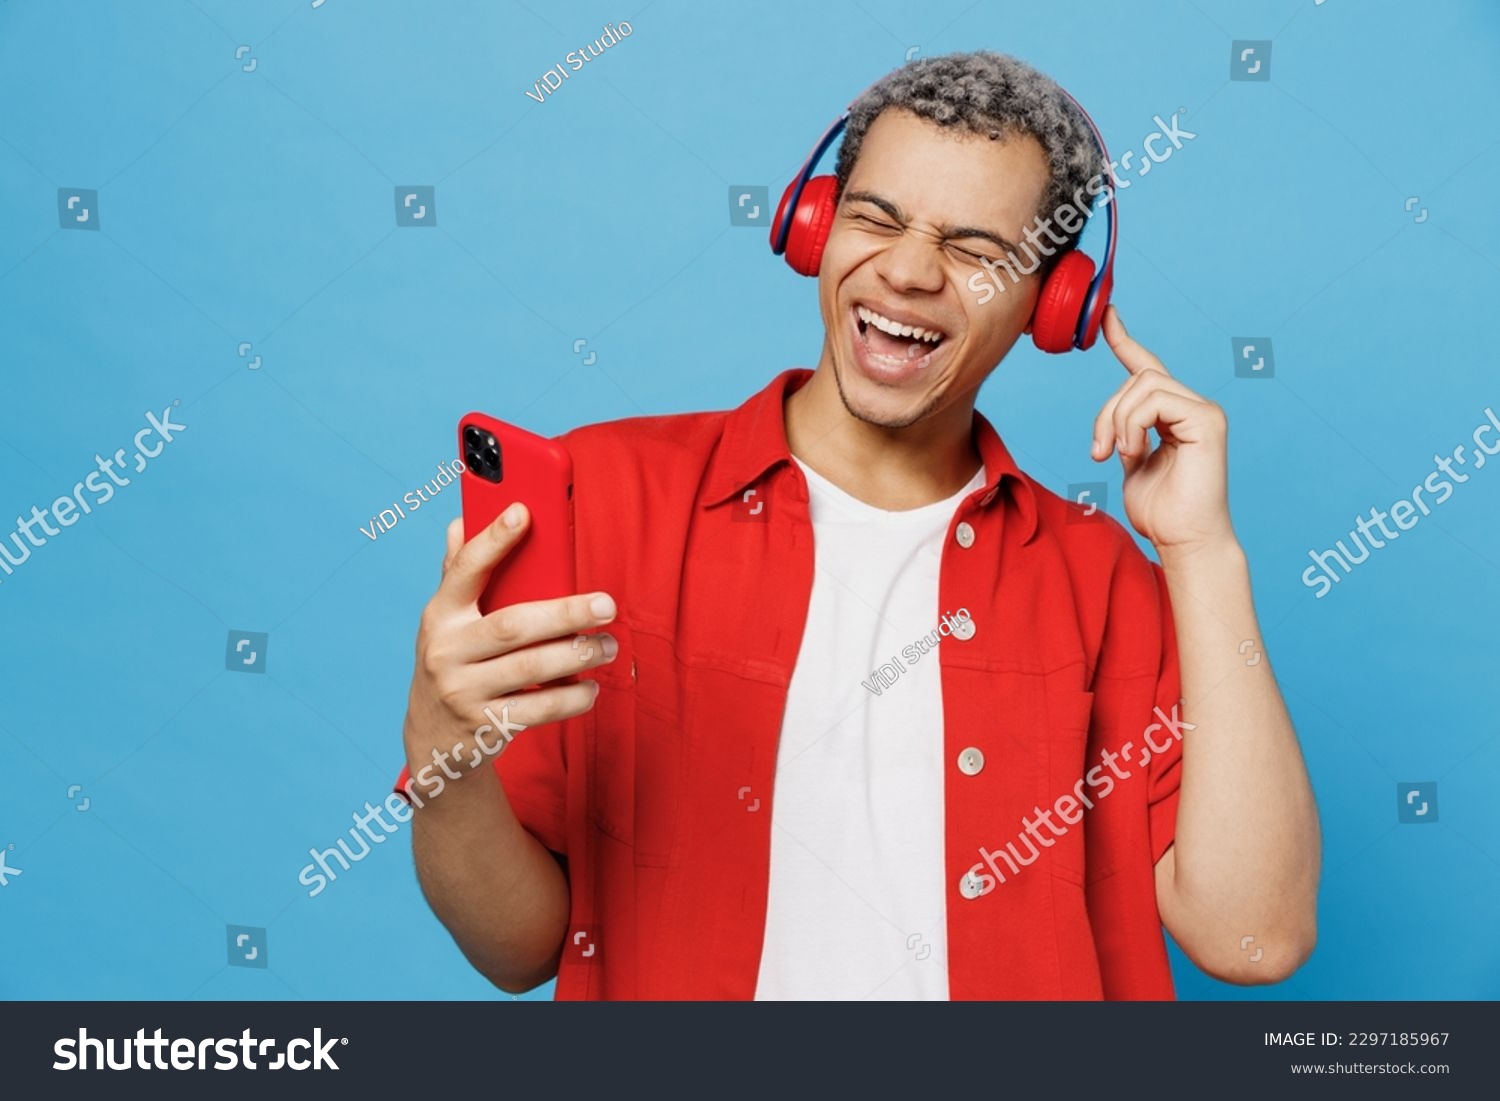 Young cheerful happy fun vivid man of African American ethnicity 20s he wearing red shirt headphones listen music sing song use mobile cell phone isolated on plain pastel light blue cyan background #2297185967